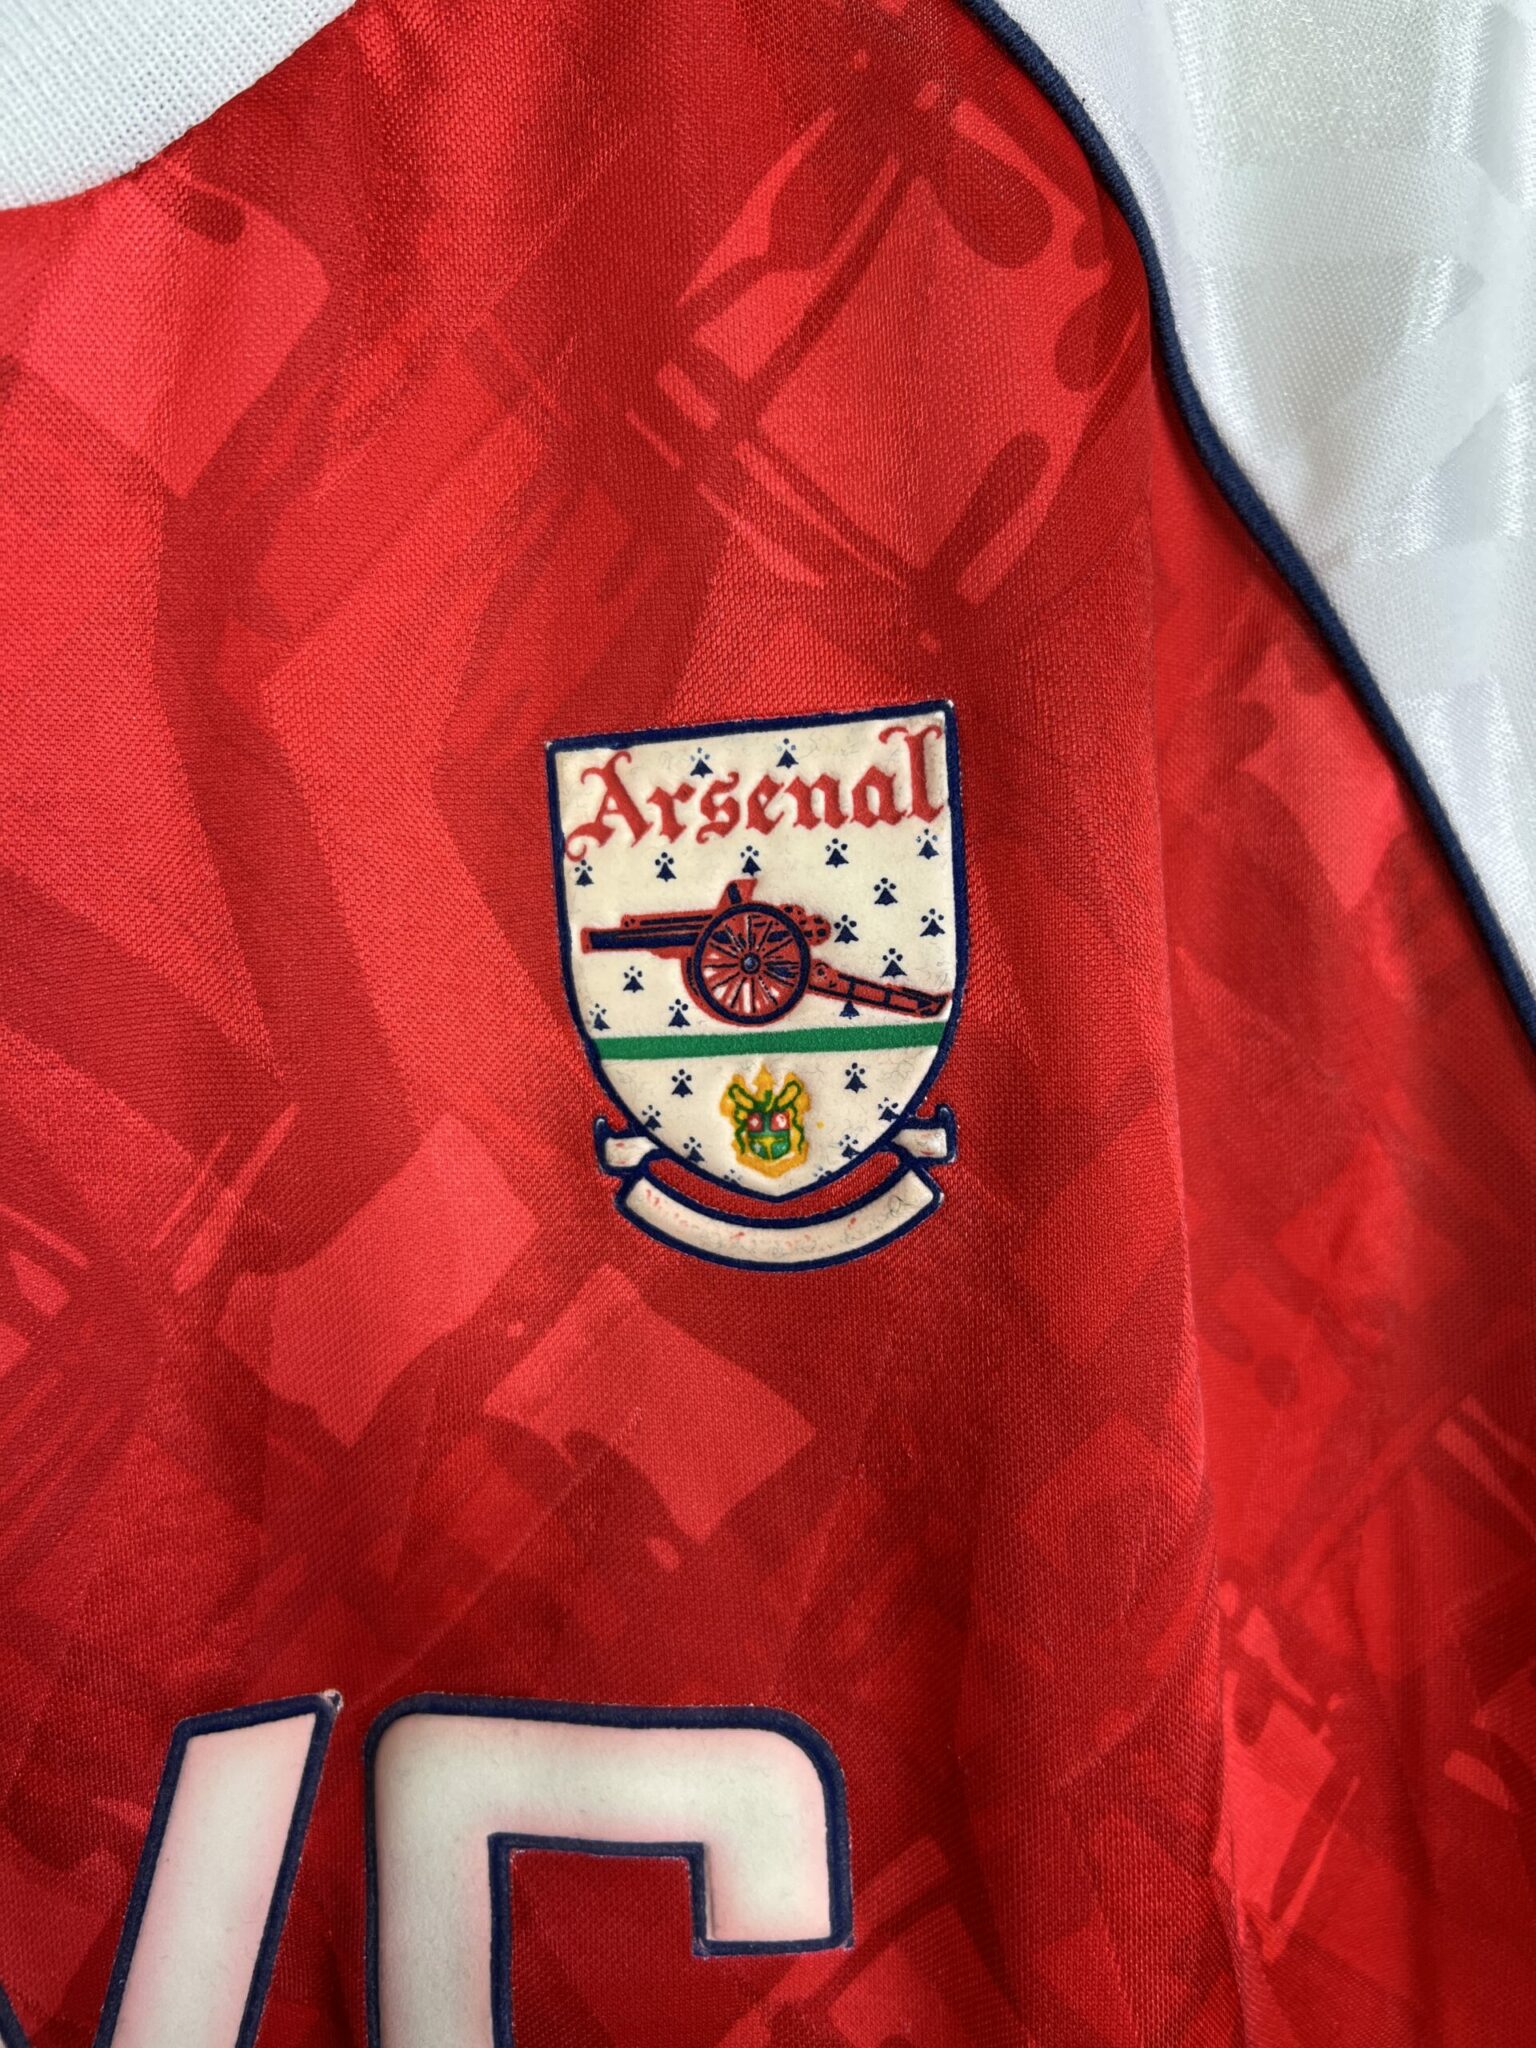 Arsenal FC 1990/92 Official Remake Jersey Kit Home AFC Genuine Large H31143  Soccer Football